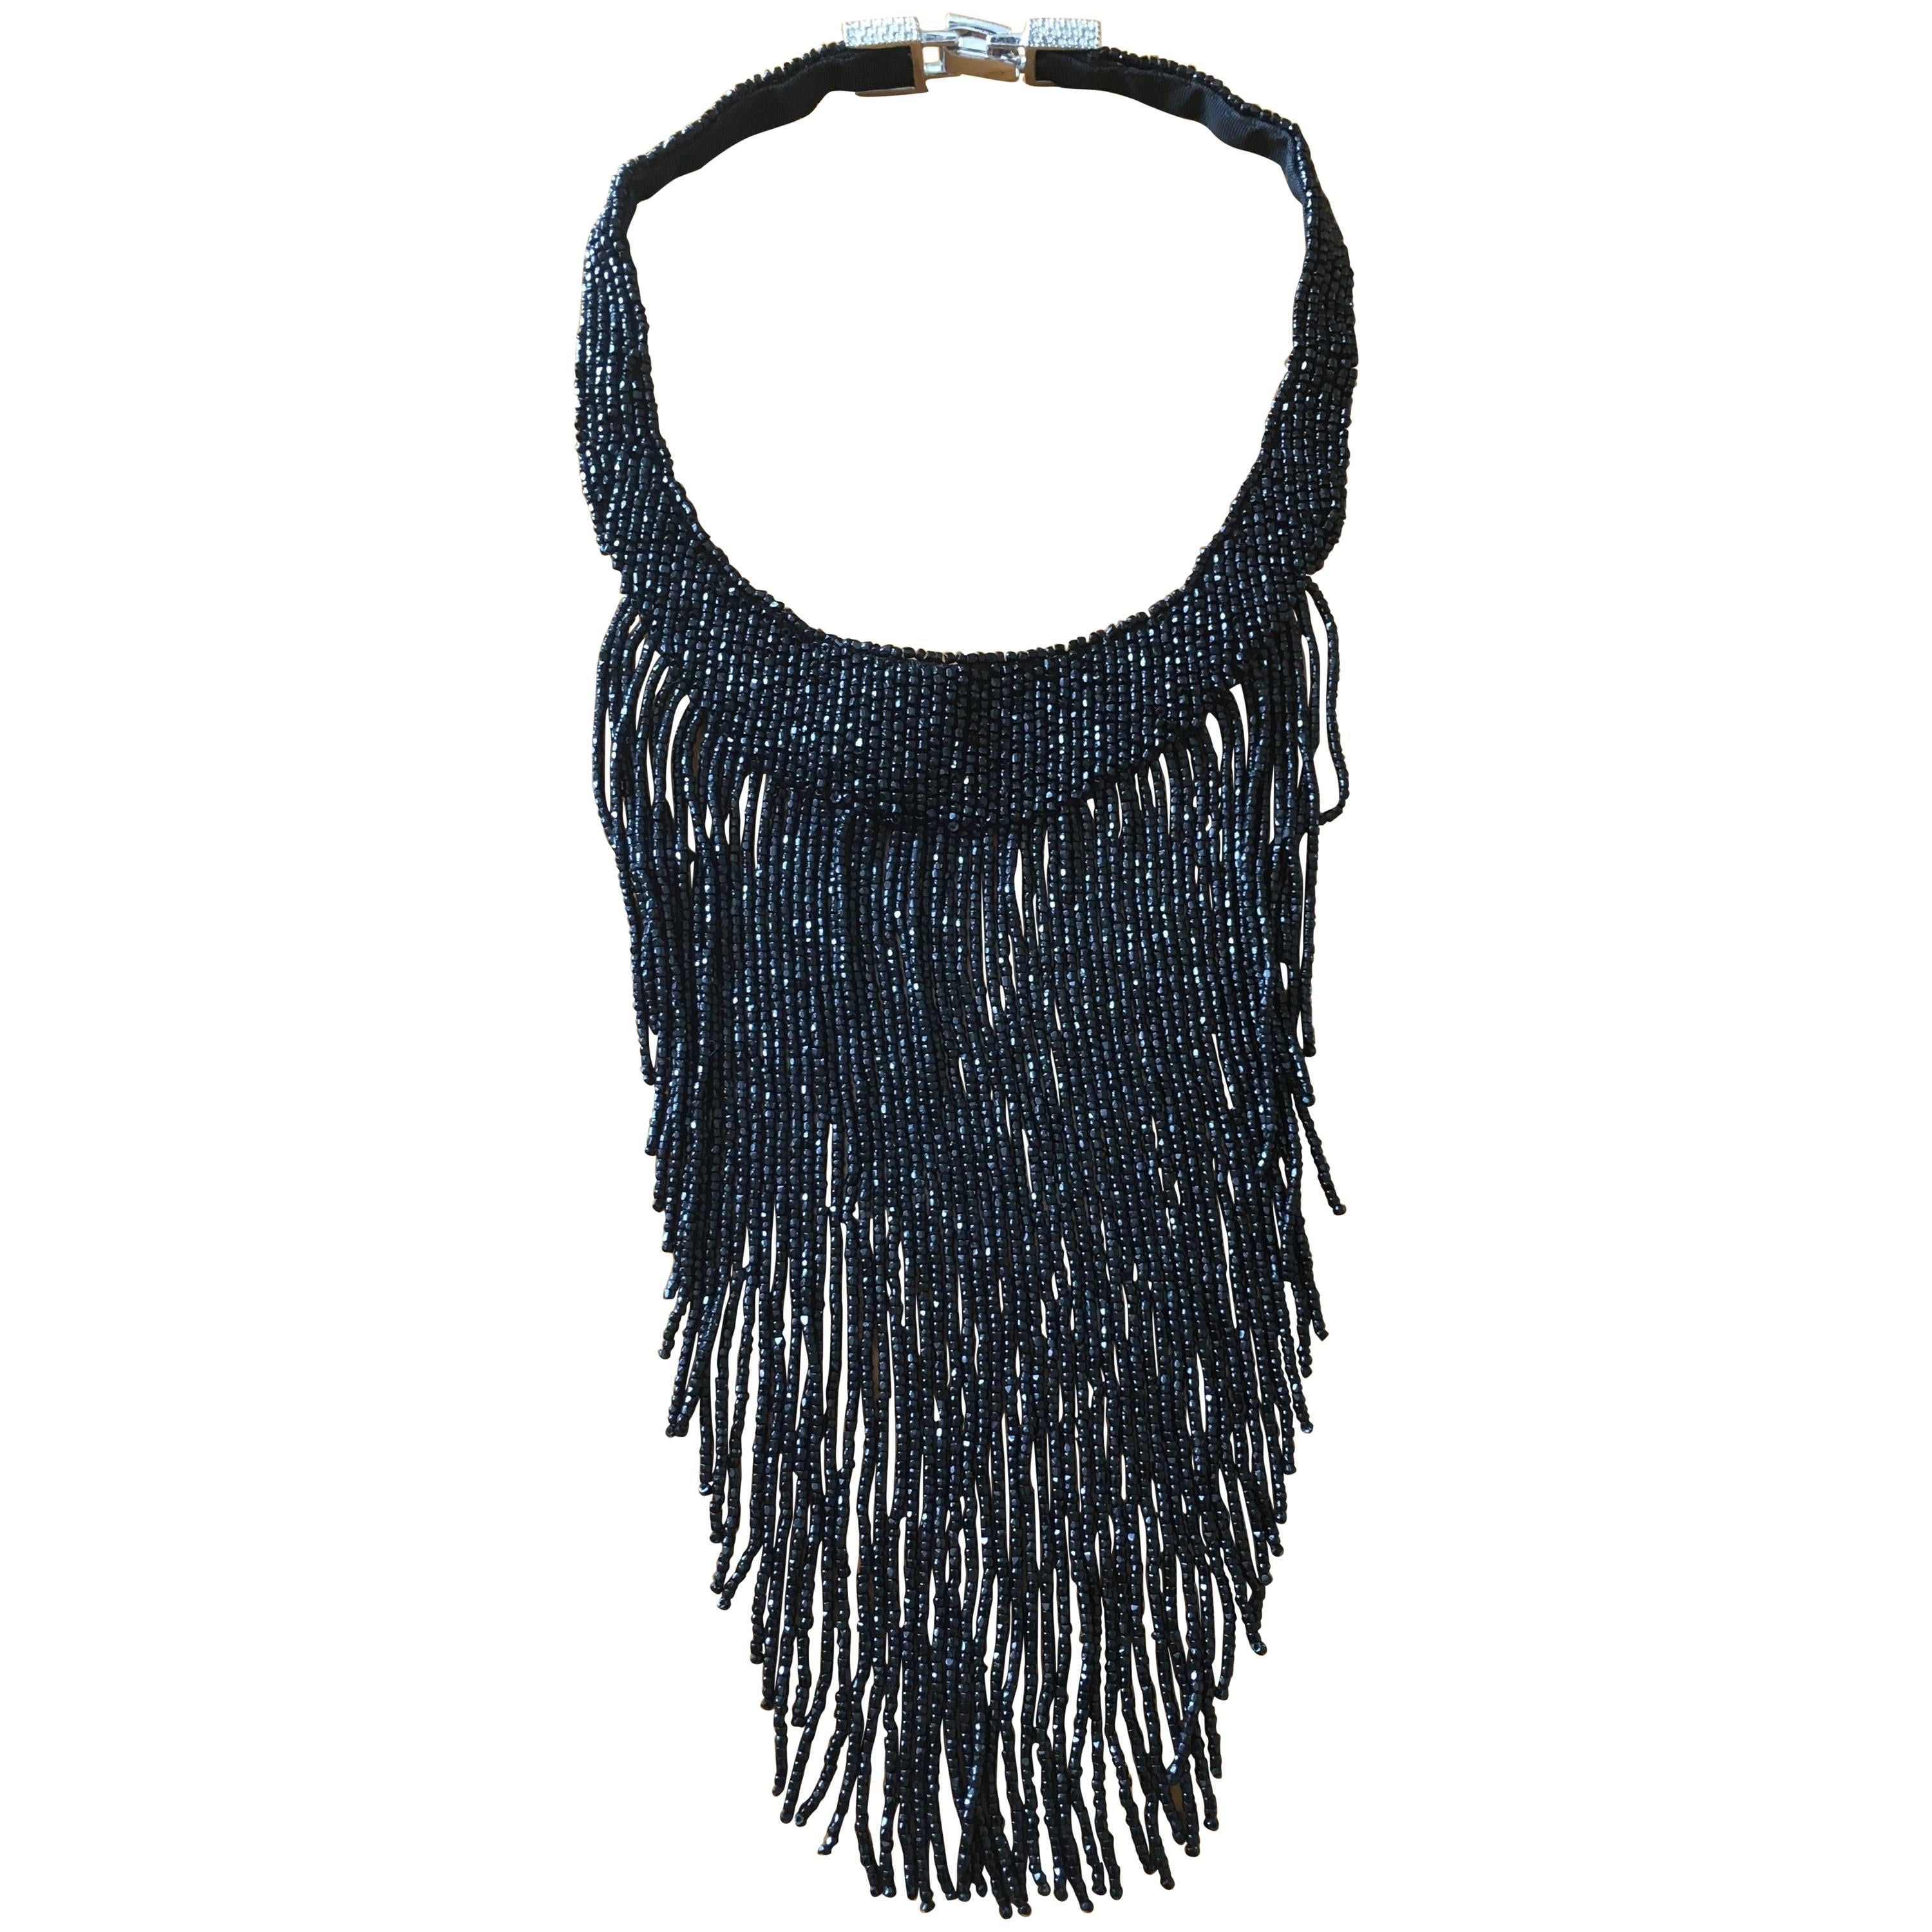 Christian Dior by John Galliano Outstanding Glass Jet Bead Fringed Bib Necklace